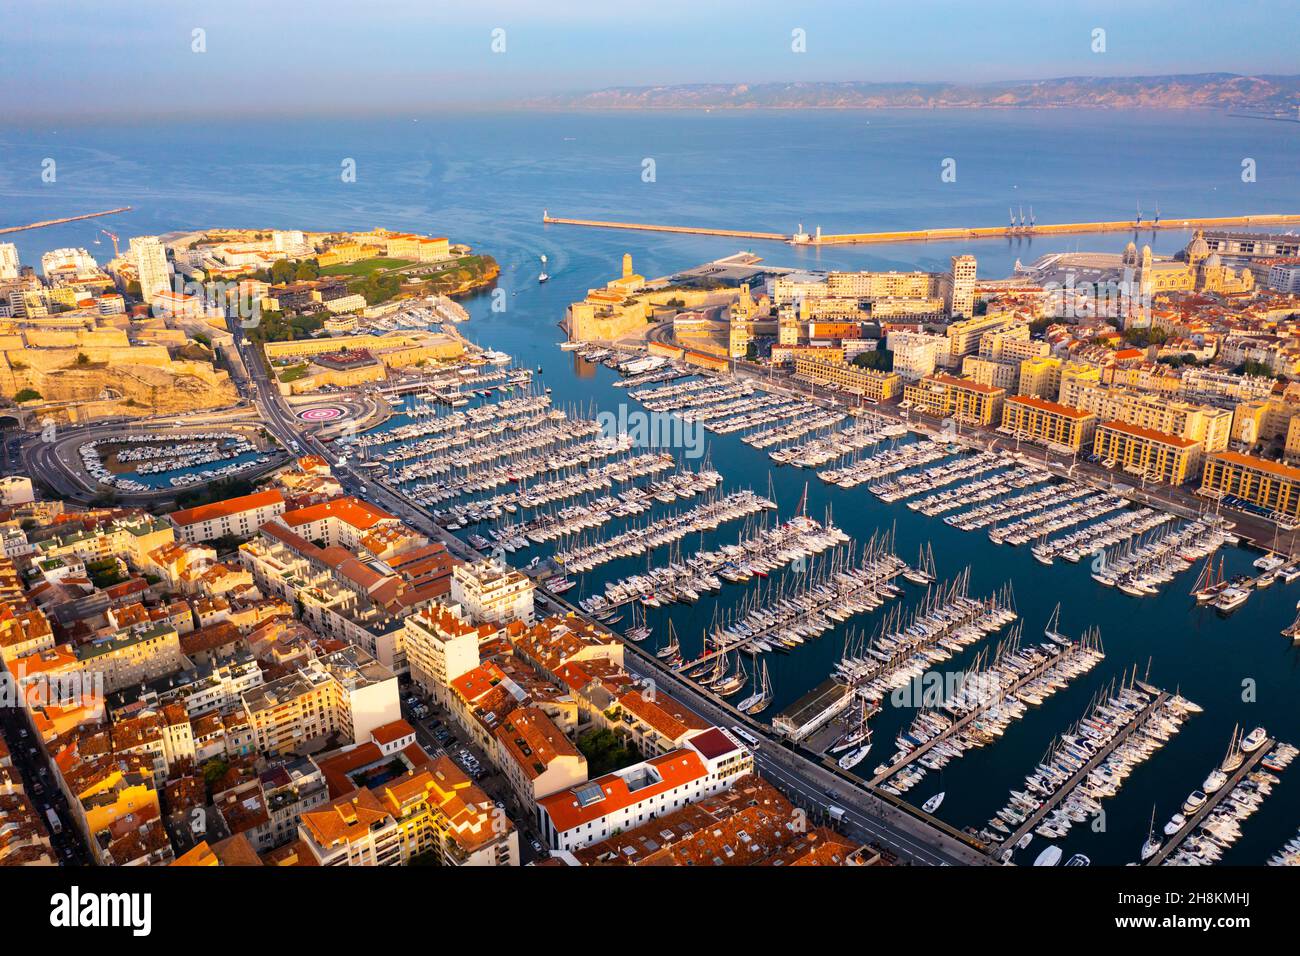 Drone view of Marseille on Mediterranean coast overlooking Old Port Stock Photo